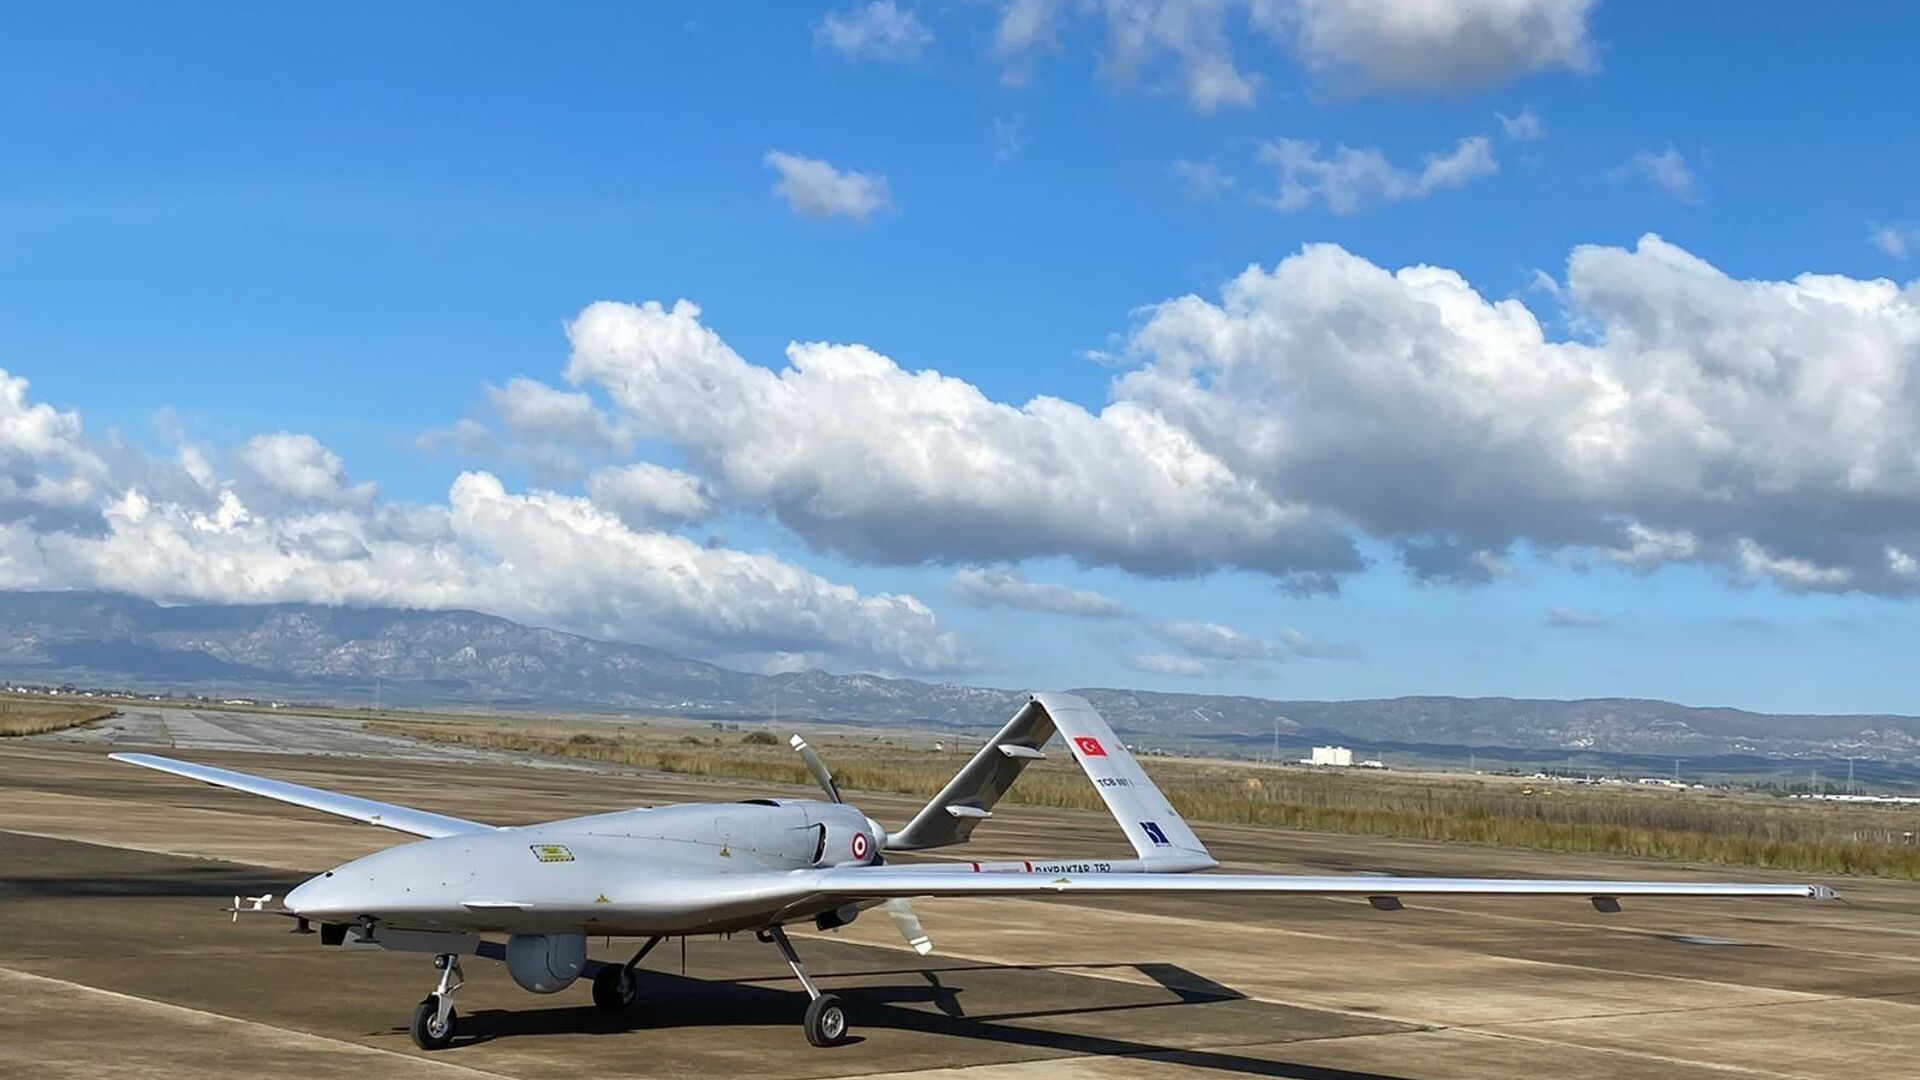 A Turkish-made Bayraktar TB2 drone is seen shortly after its landing at an airport in Gecitkala, known as Lefkoniko in Greek, in Cyprus, Monday, Dec. 16, 2019 - اسپوتنیک افغانستان  , 1920, 10.09.2022